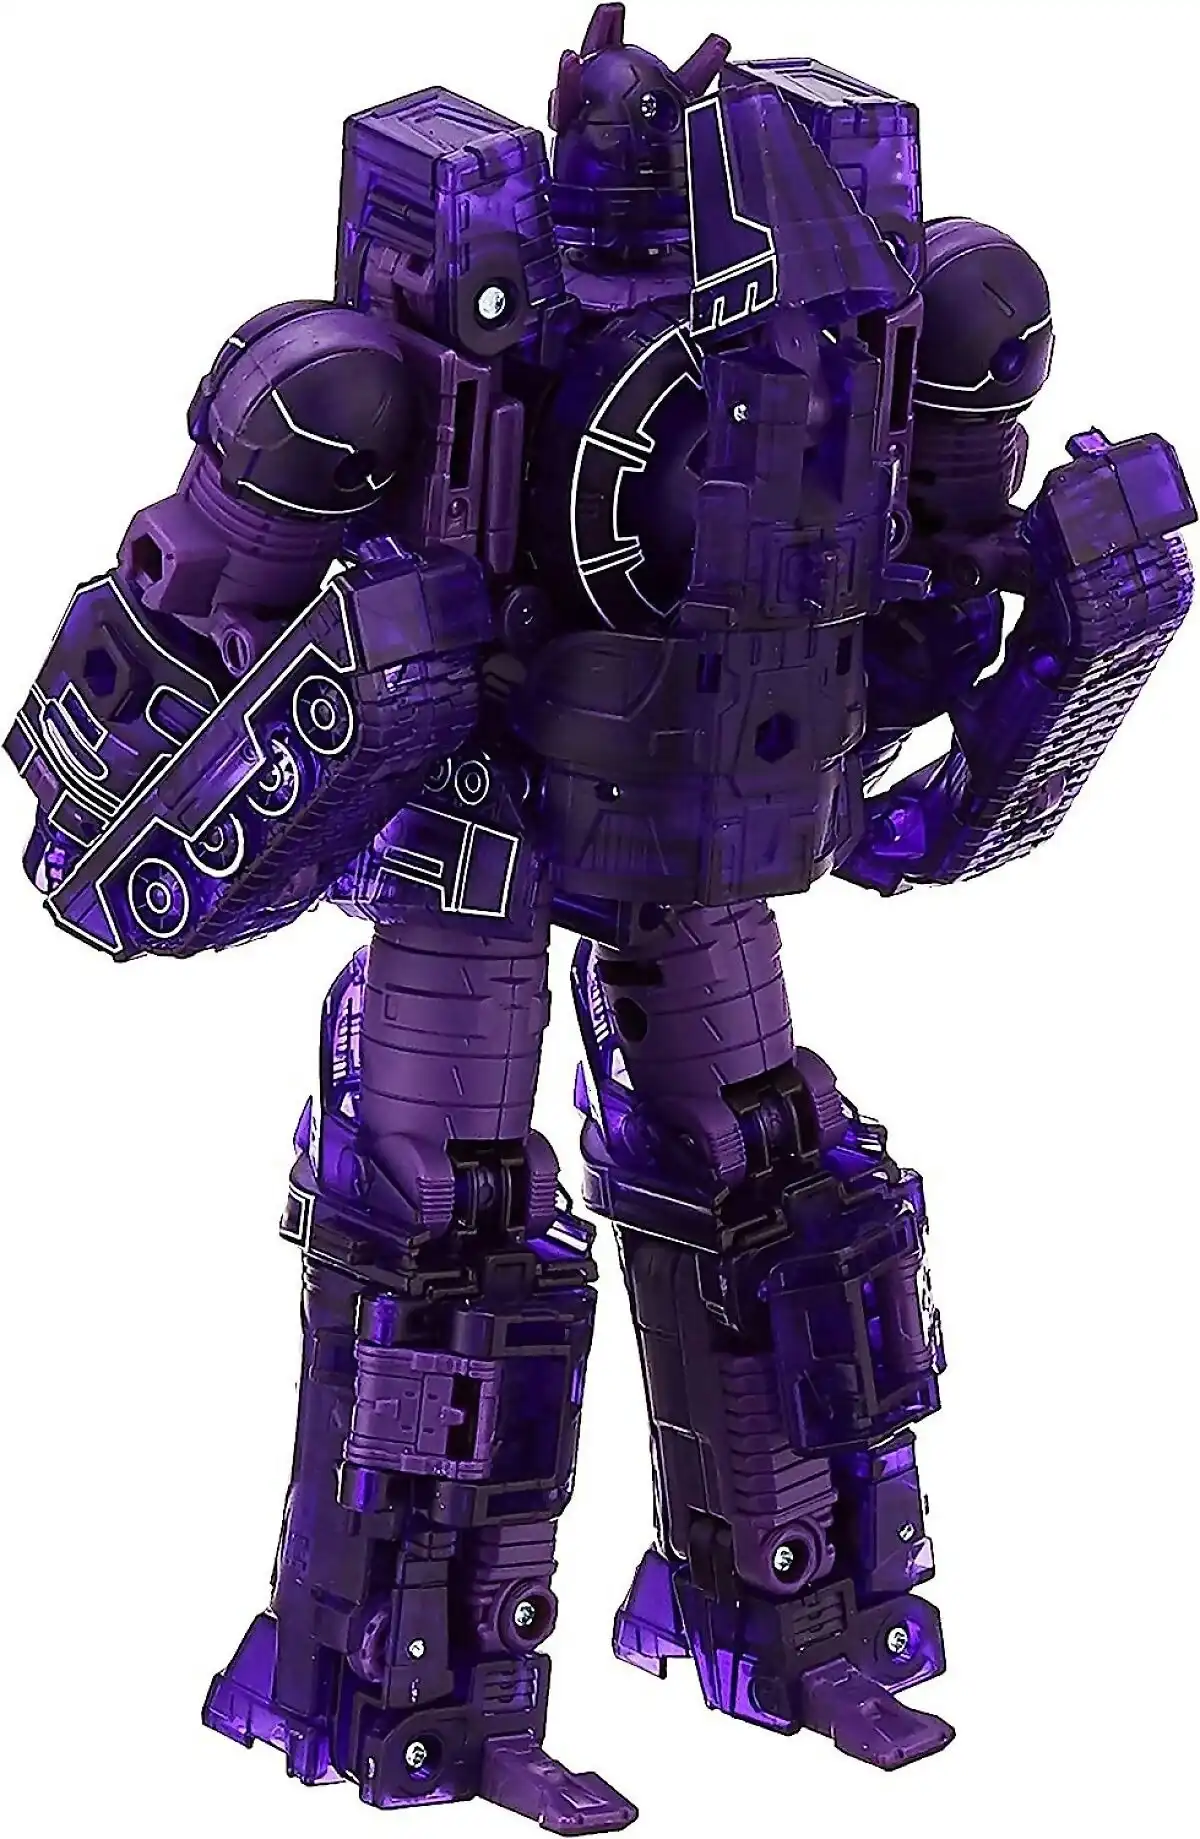 Transformers - Generations War For Cybertron Leader Behold Galvatron! Unicron Companion Pack - Hasbro